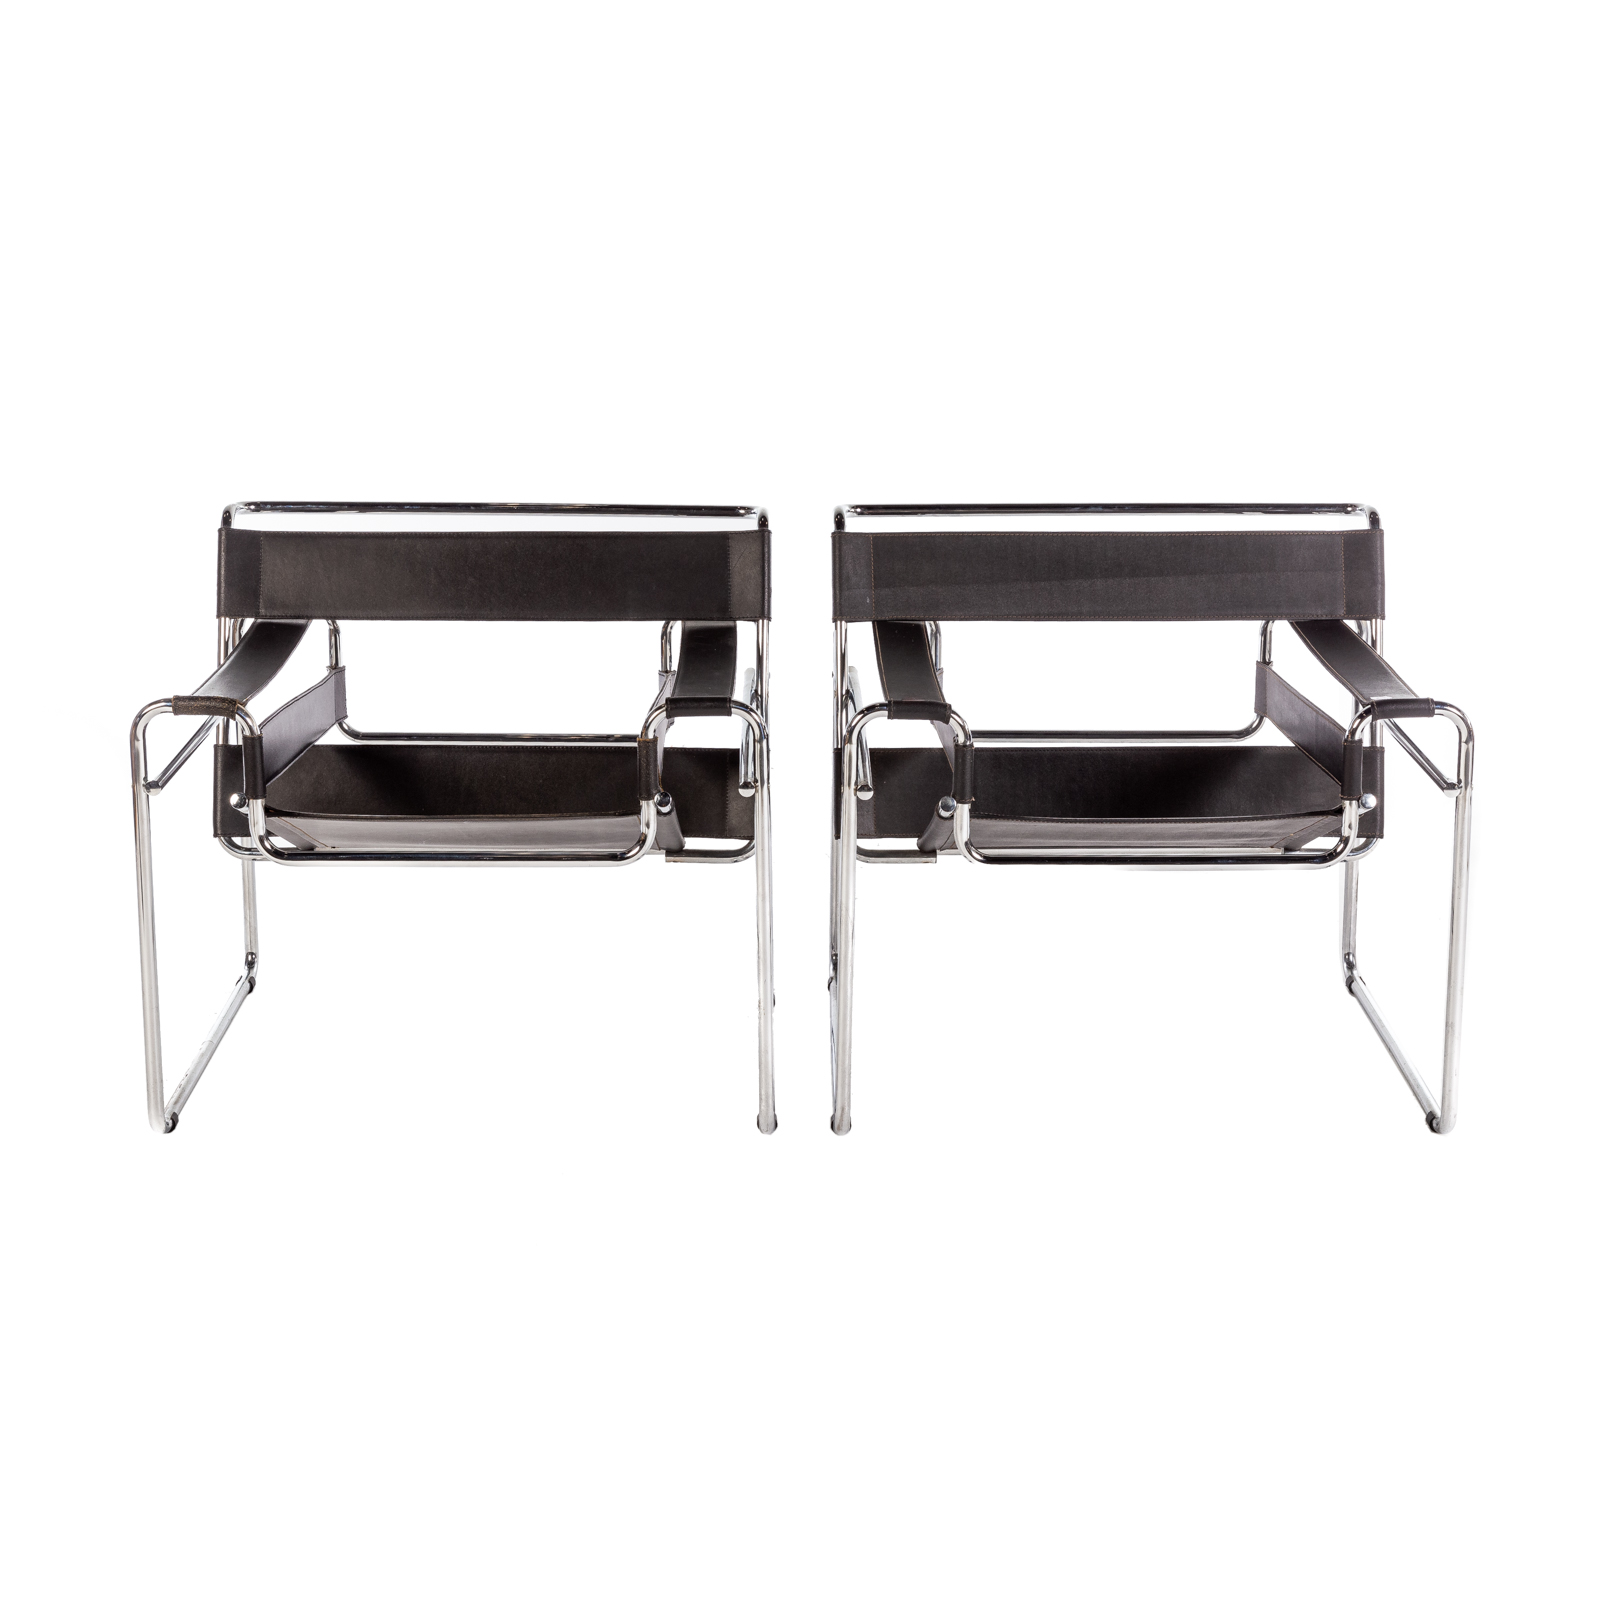 A PAIR OF MARCEL BREUER STYLE WASSILY 288721